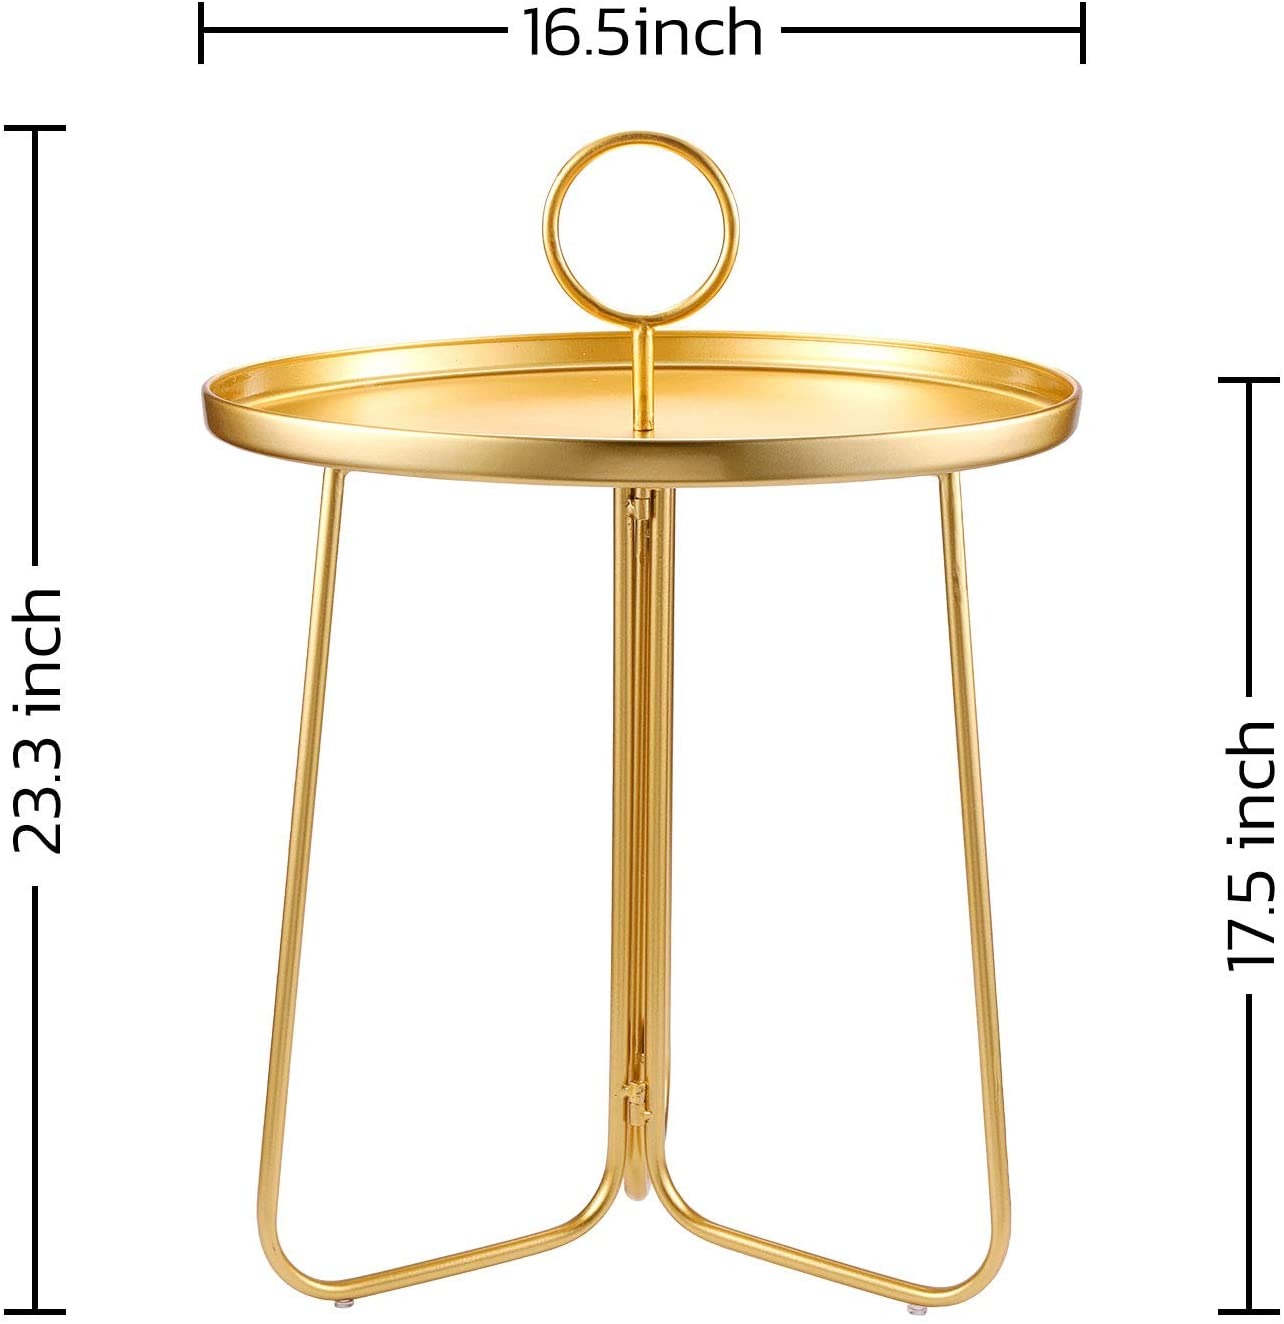 HYGGEISM Round End Table Metal with Handle, Portable Gold Circular Tray Nightstand for Bedside Sofa Small Spaces, Anti-Rust Outdoor Indoor Accent Snack Coffee Tablev